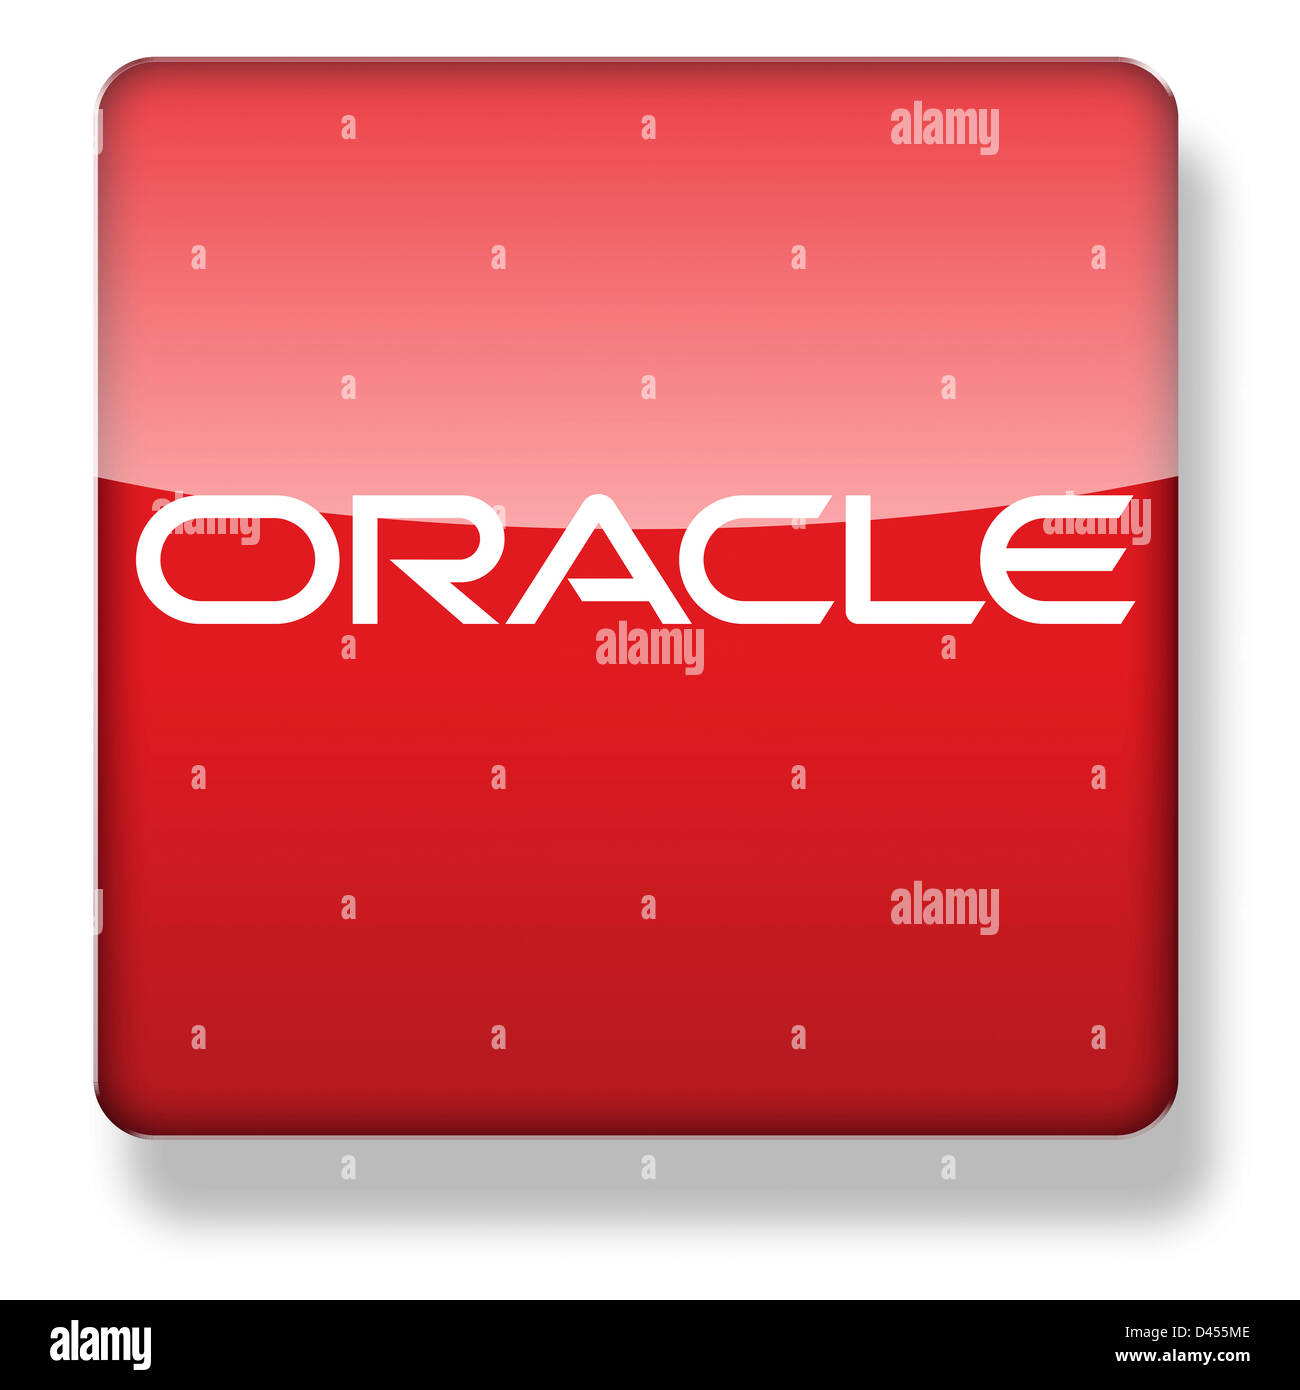 Oracle logo as an app icon. Clipping path included. Stock Photo